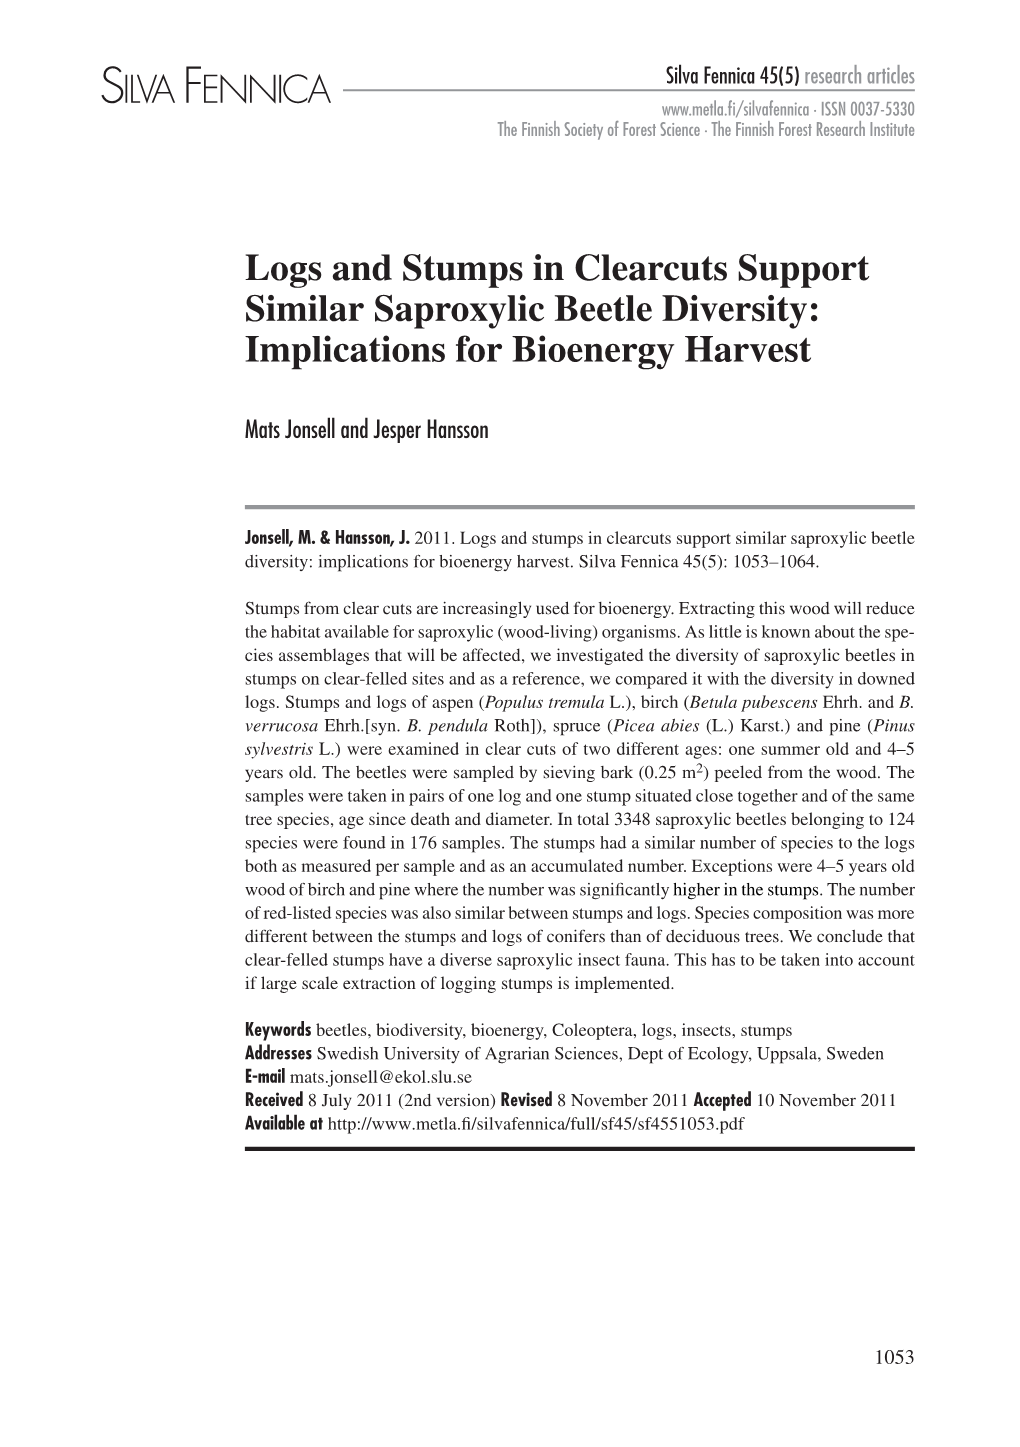 Logs and Stumps in Clearcuts Support Similar Saproxylic Beetle Diversity: Implications for Bioenergy Harvest